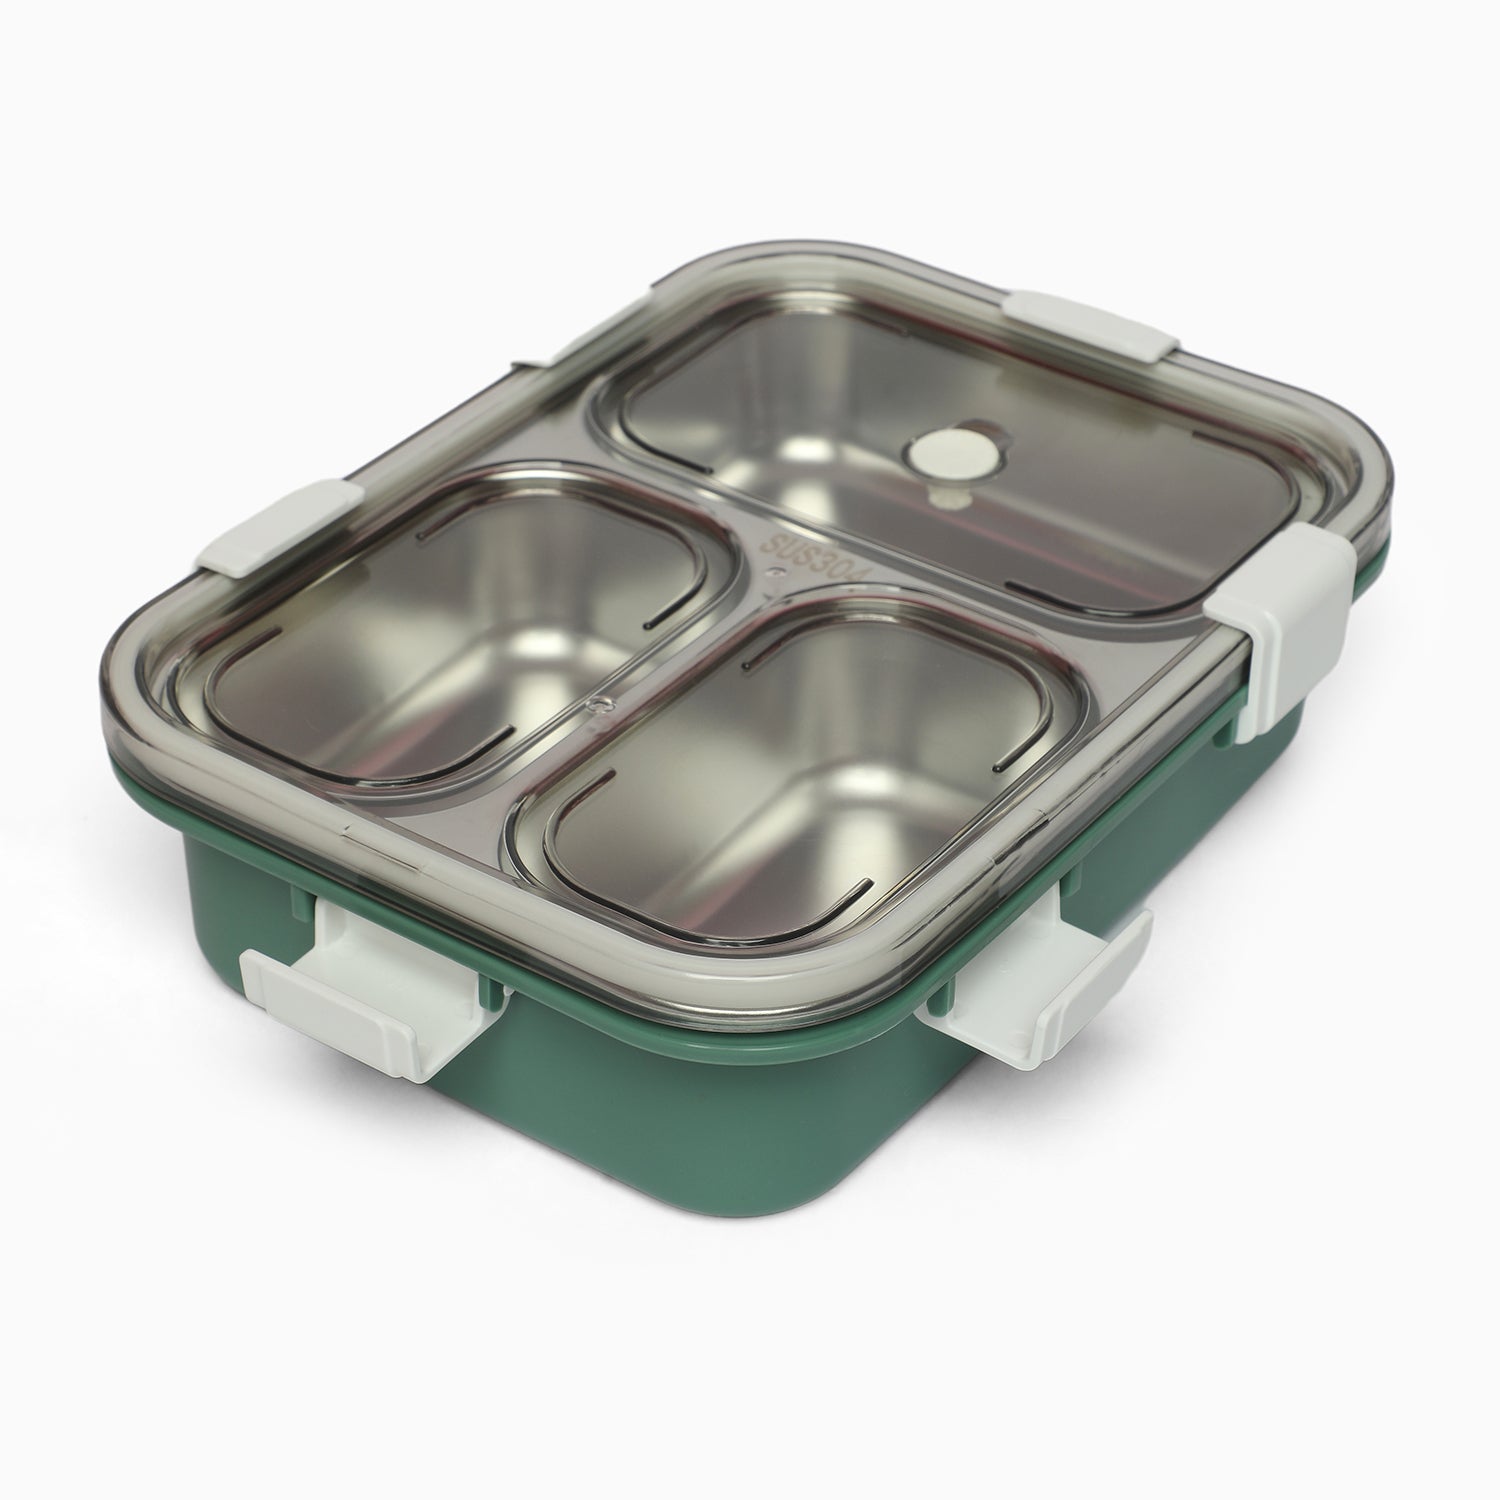 3 compartment Triple Grid stainless Steel Lunch Box -750 ML (green)